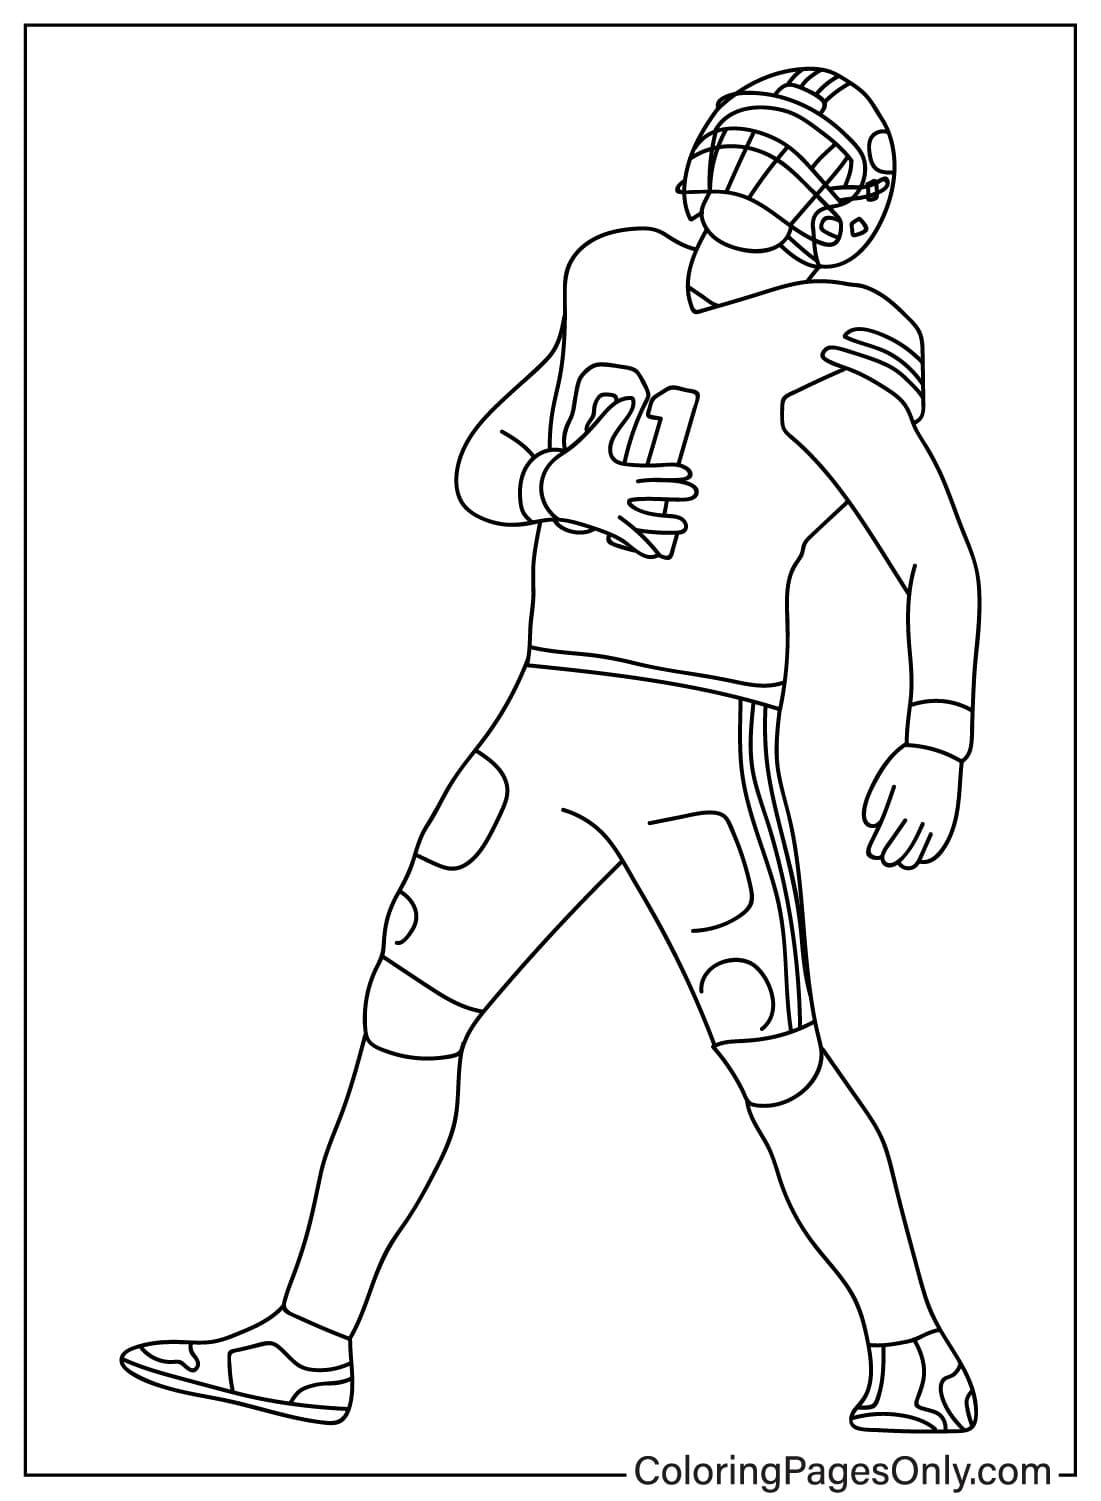 Arik Armstead Coloring Page from San Francisco 49ers